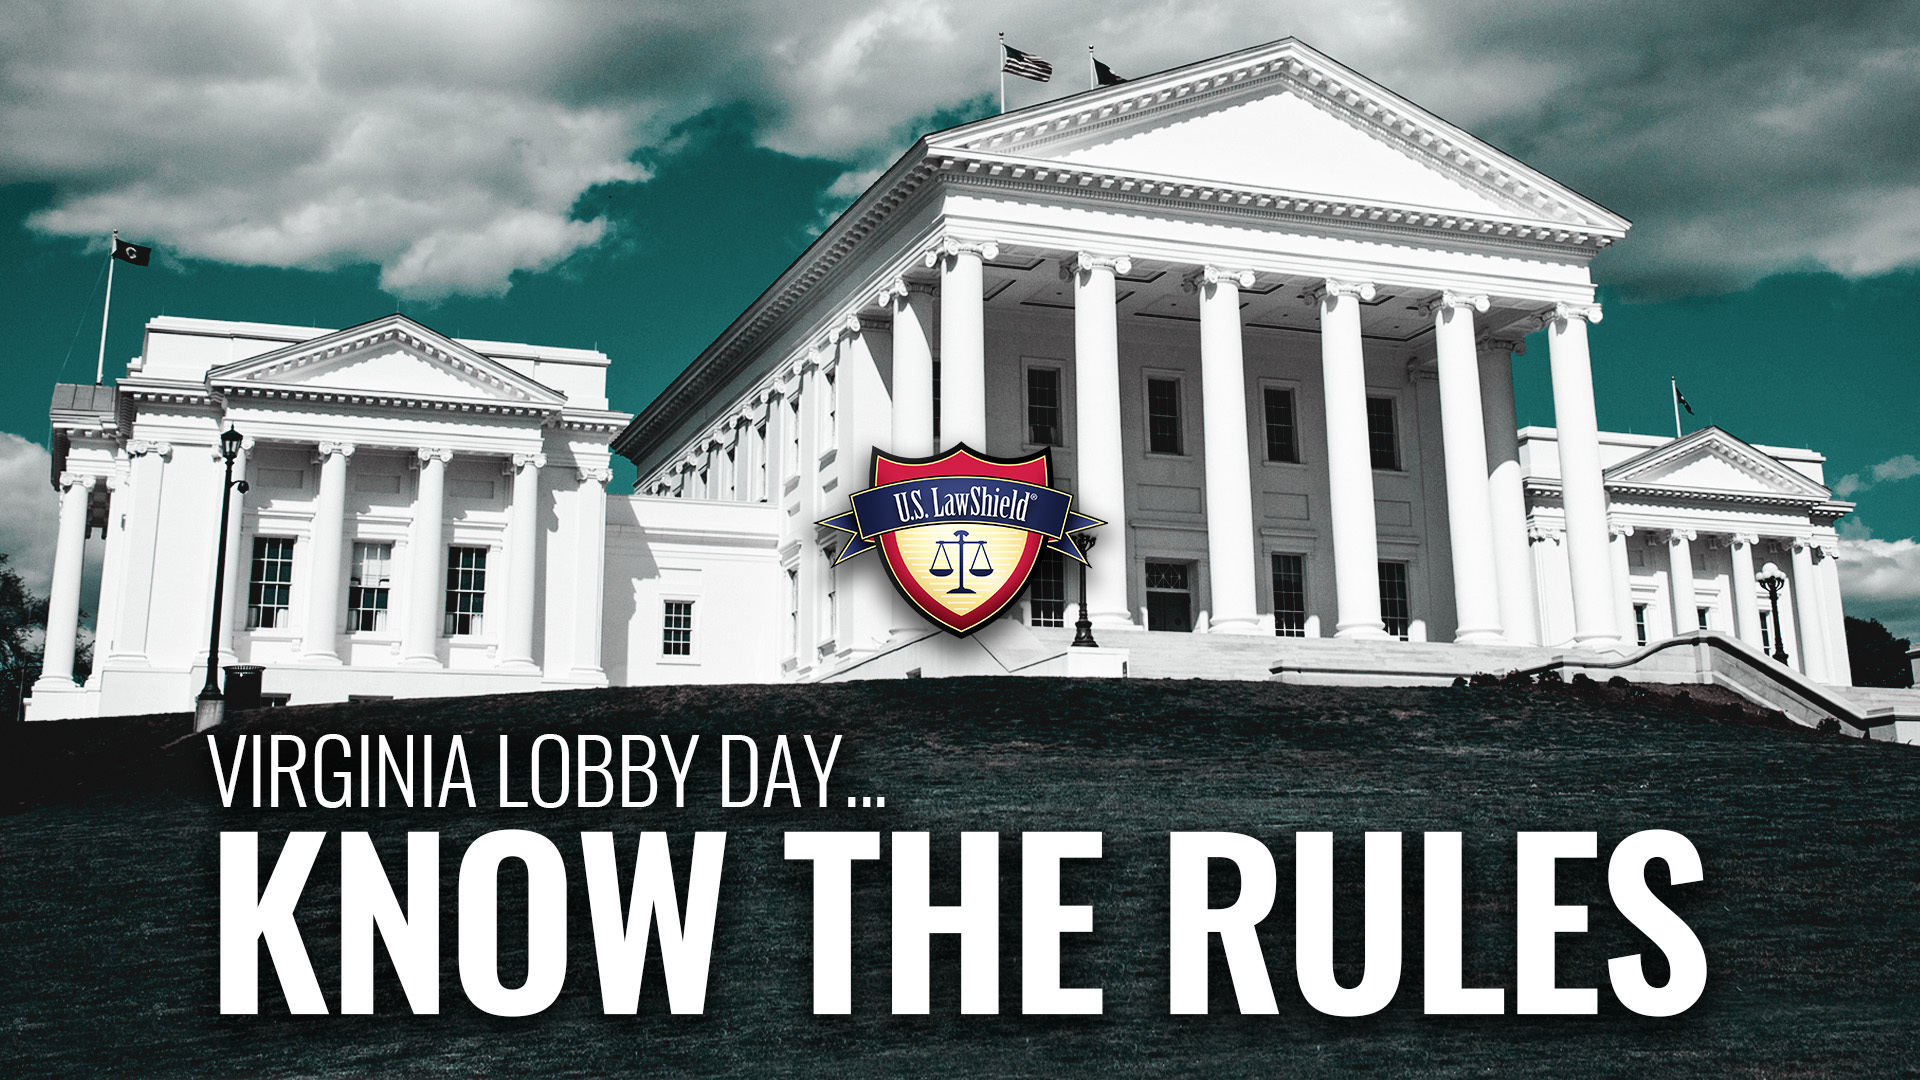 Virginia Lobby Day Know the Rules U.S. LawShield